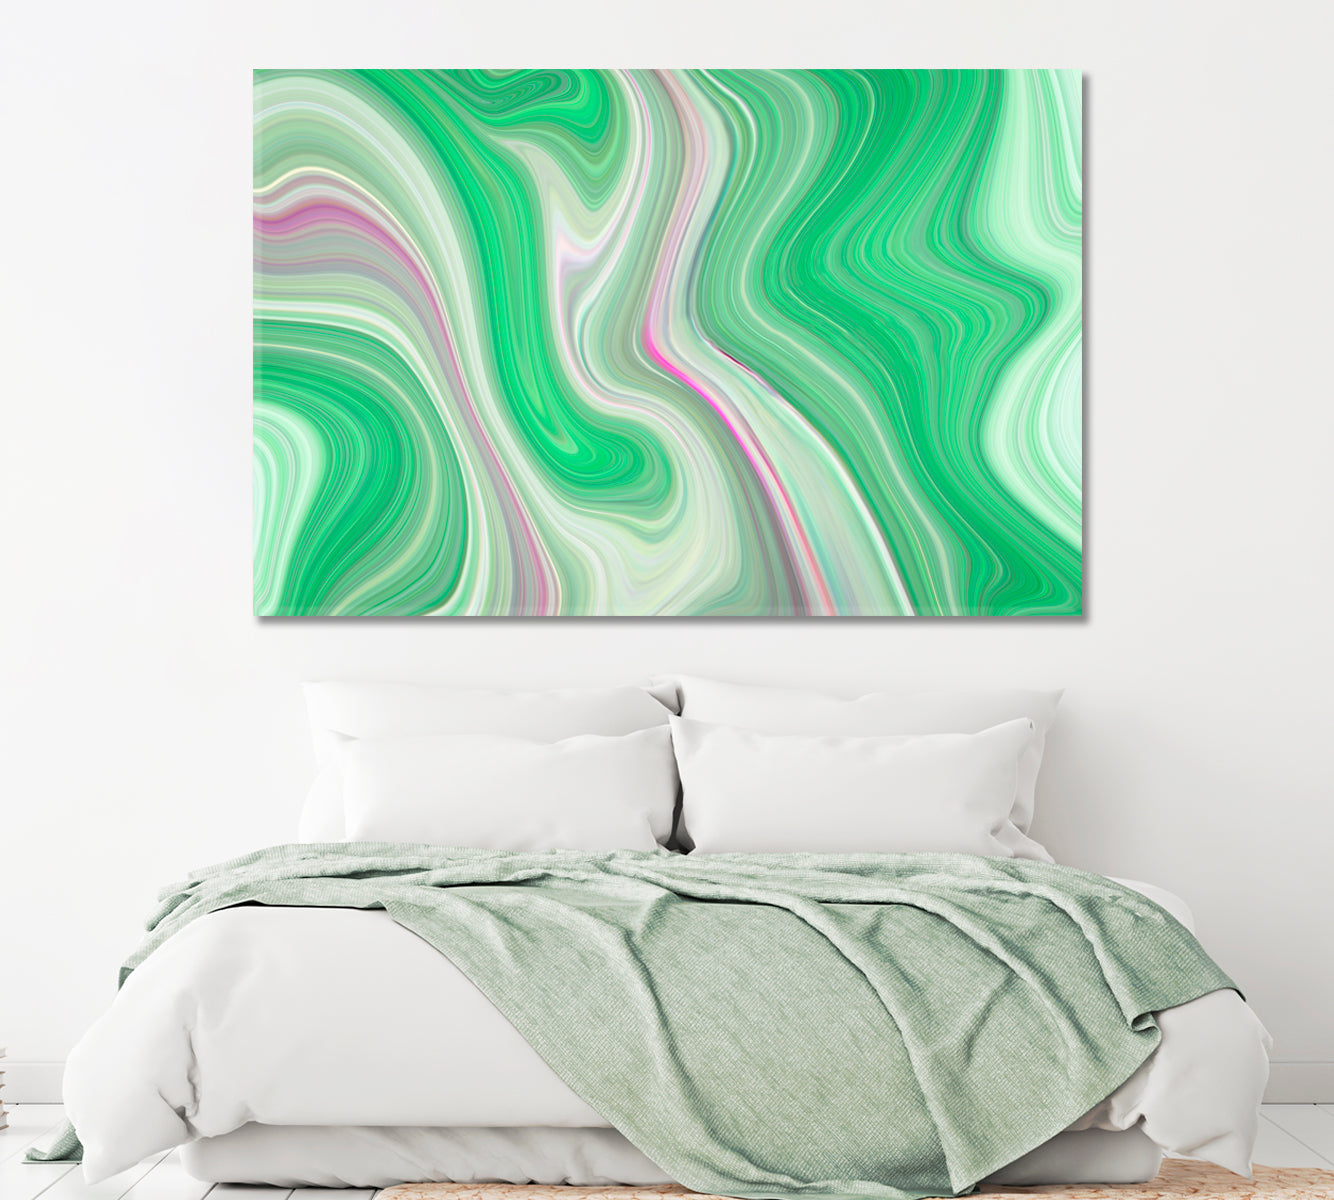 Green Marble Design Canvas Print ArtLexy 1 Panel 24"x16" inches 